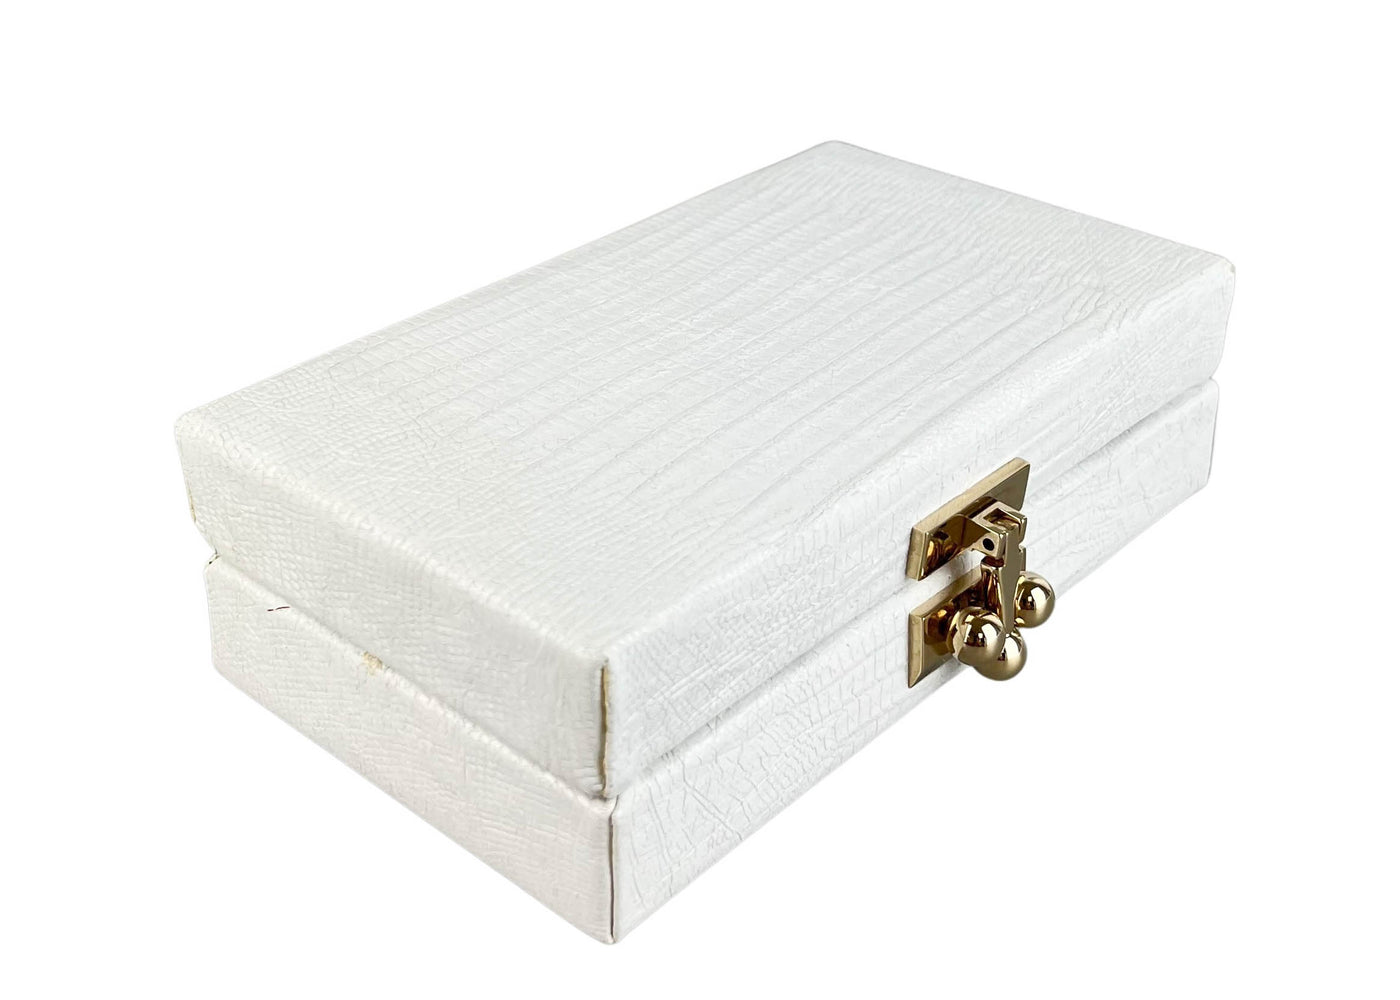 Edie Parker Jean Lizard Box Clutch in White - Discounts on Edie Parker at UAL